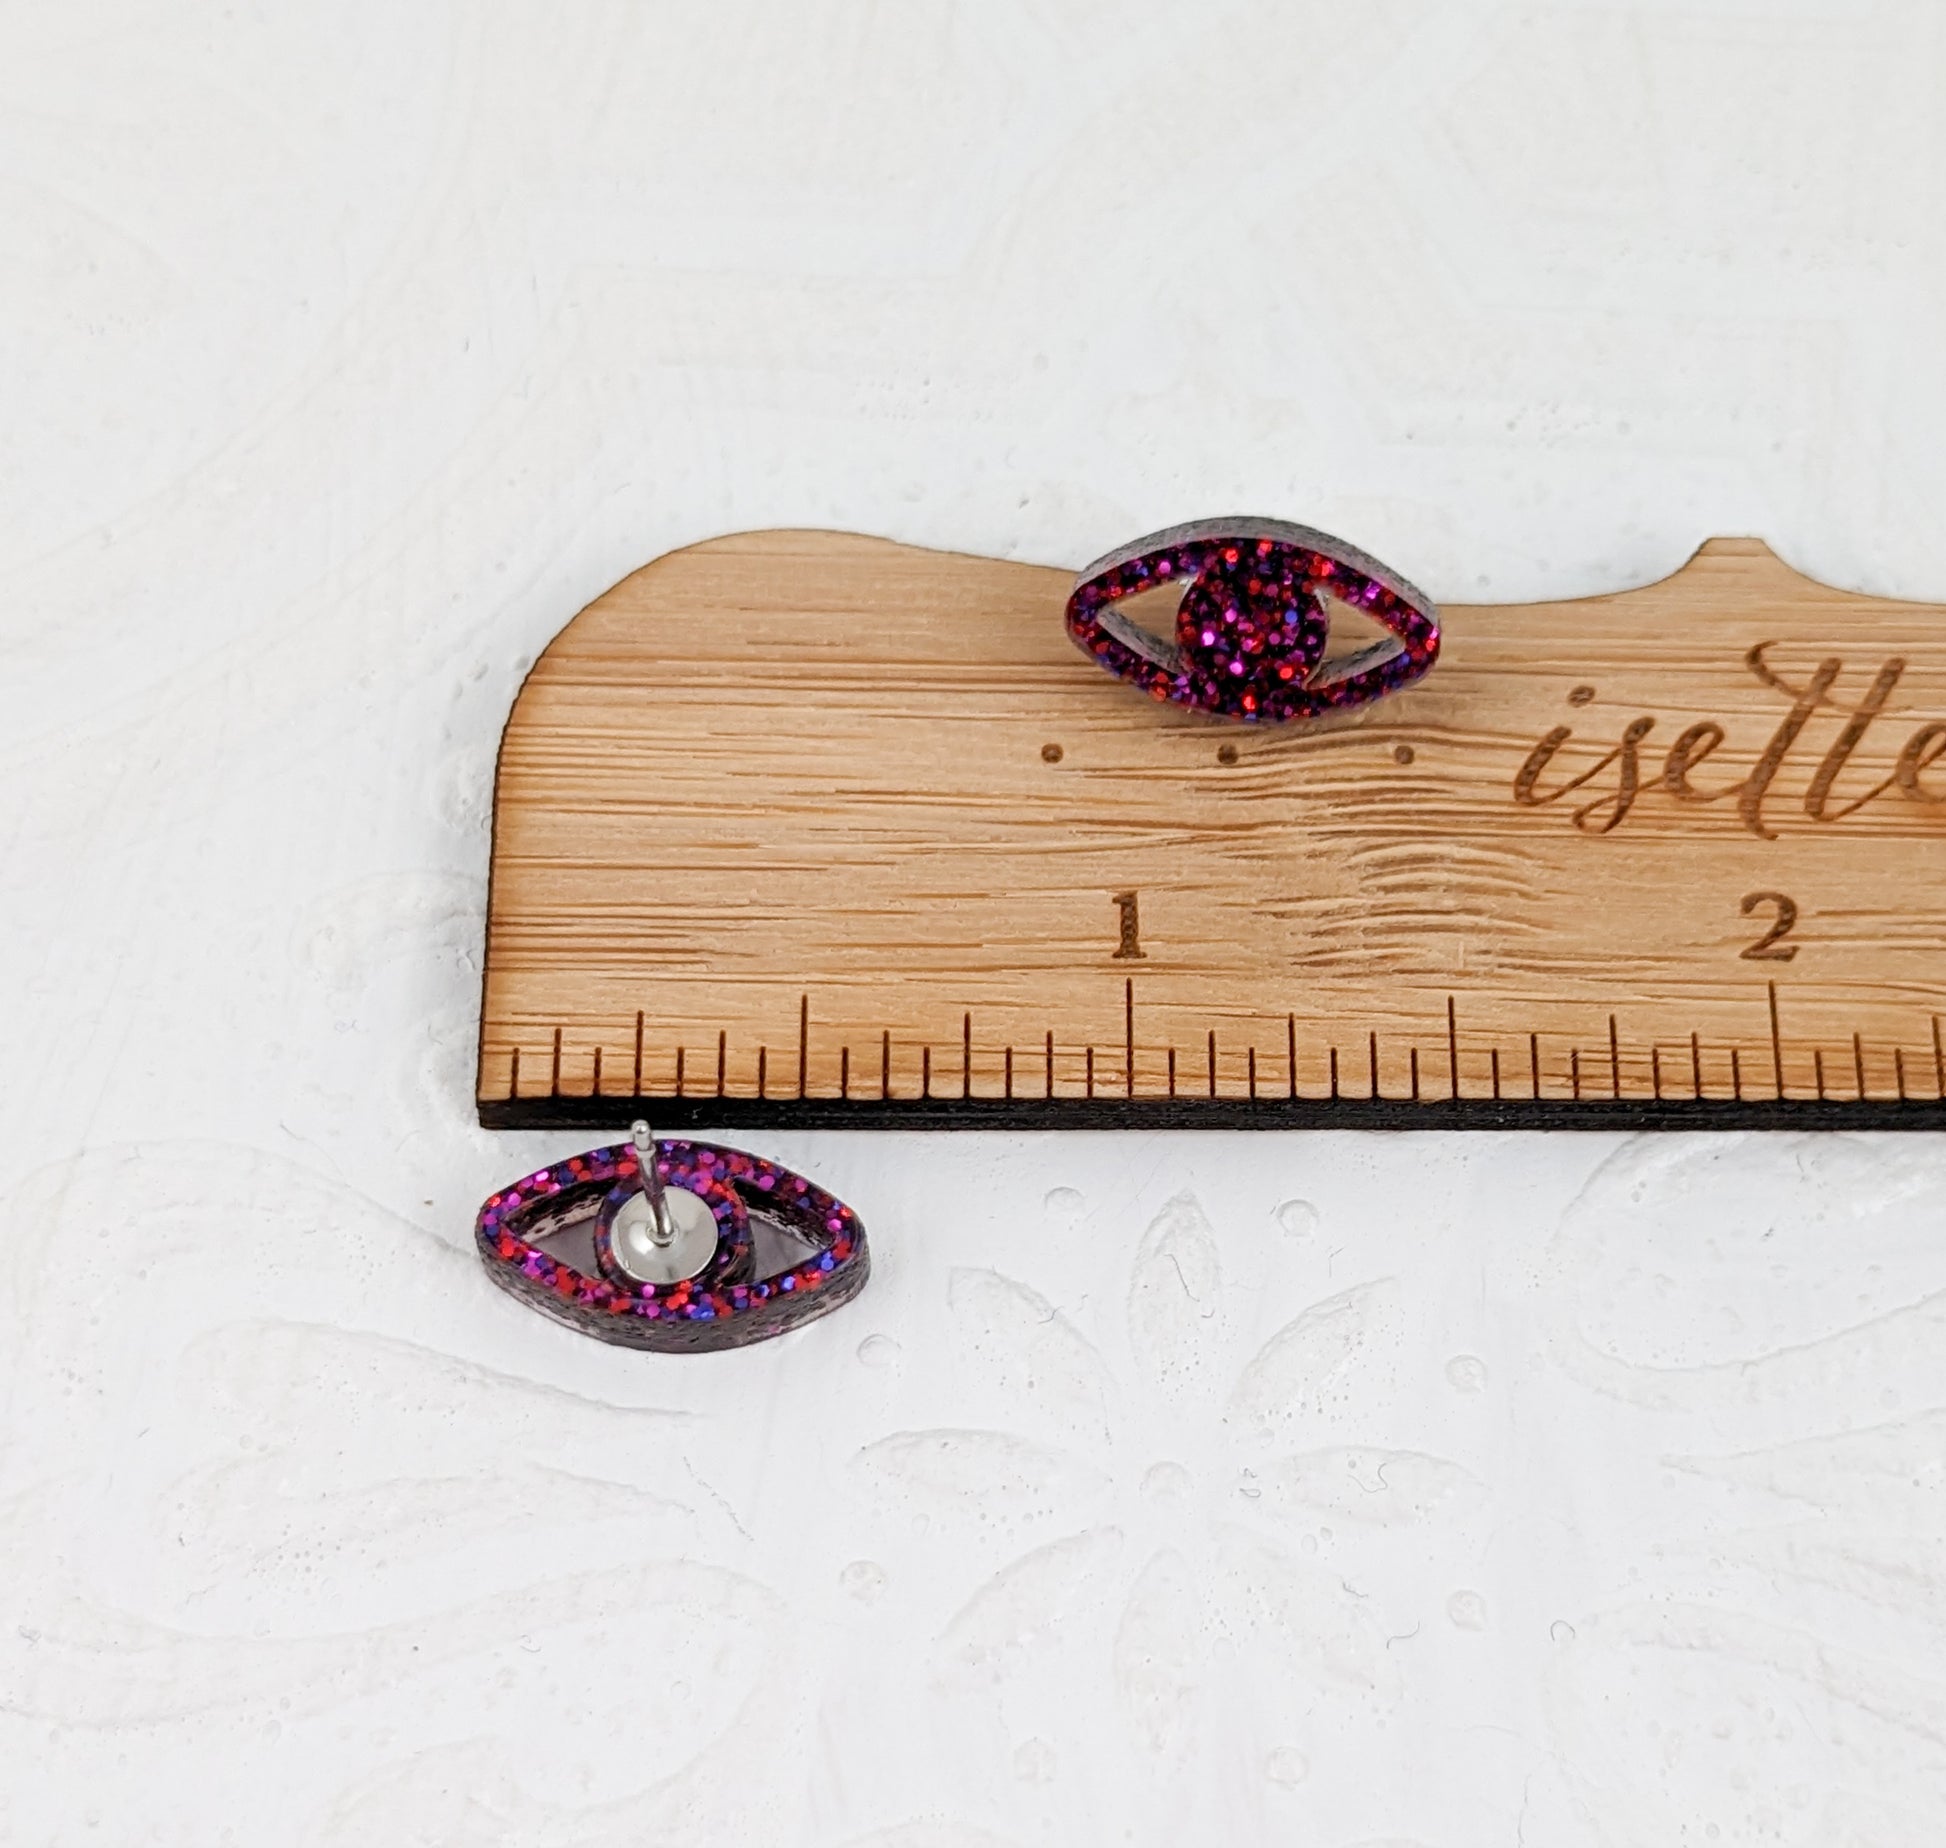 Peepers - Eye shaped stud earrings made with ruby sparkle acrylic and stainless steel posts measured with wooden ruler